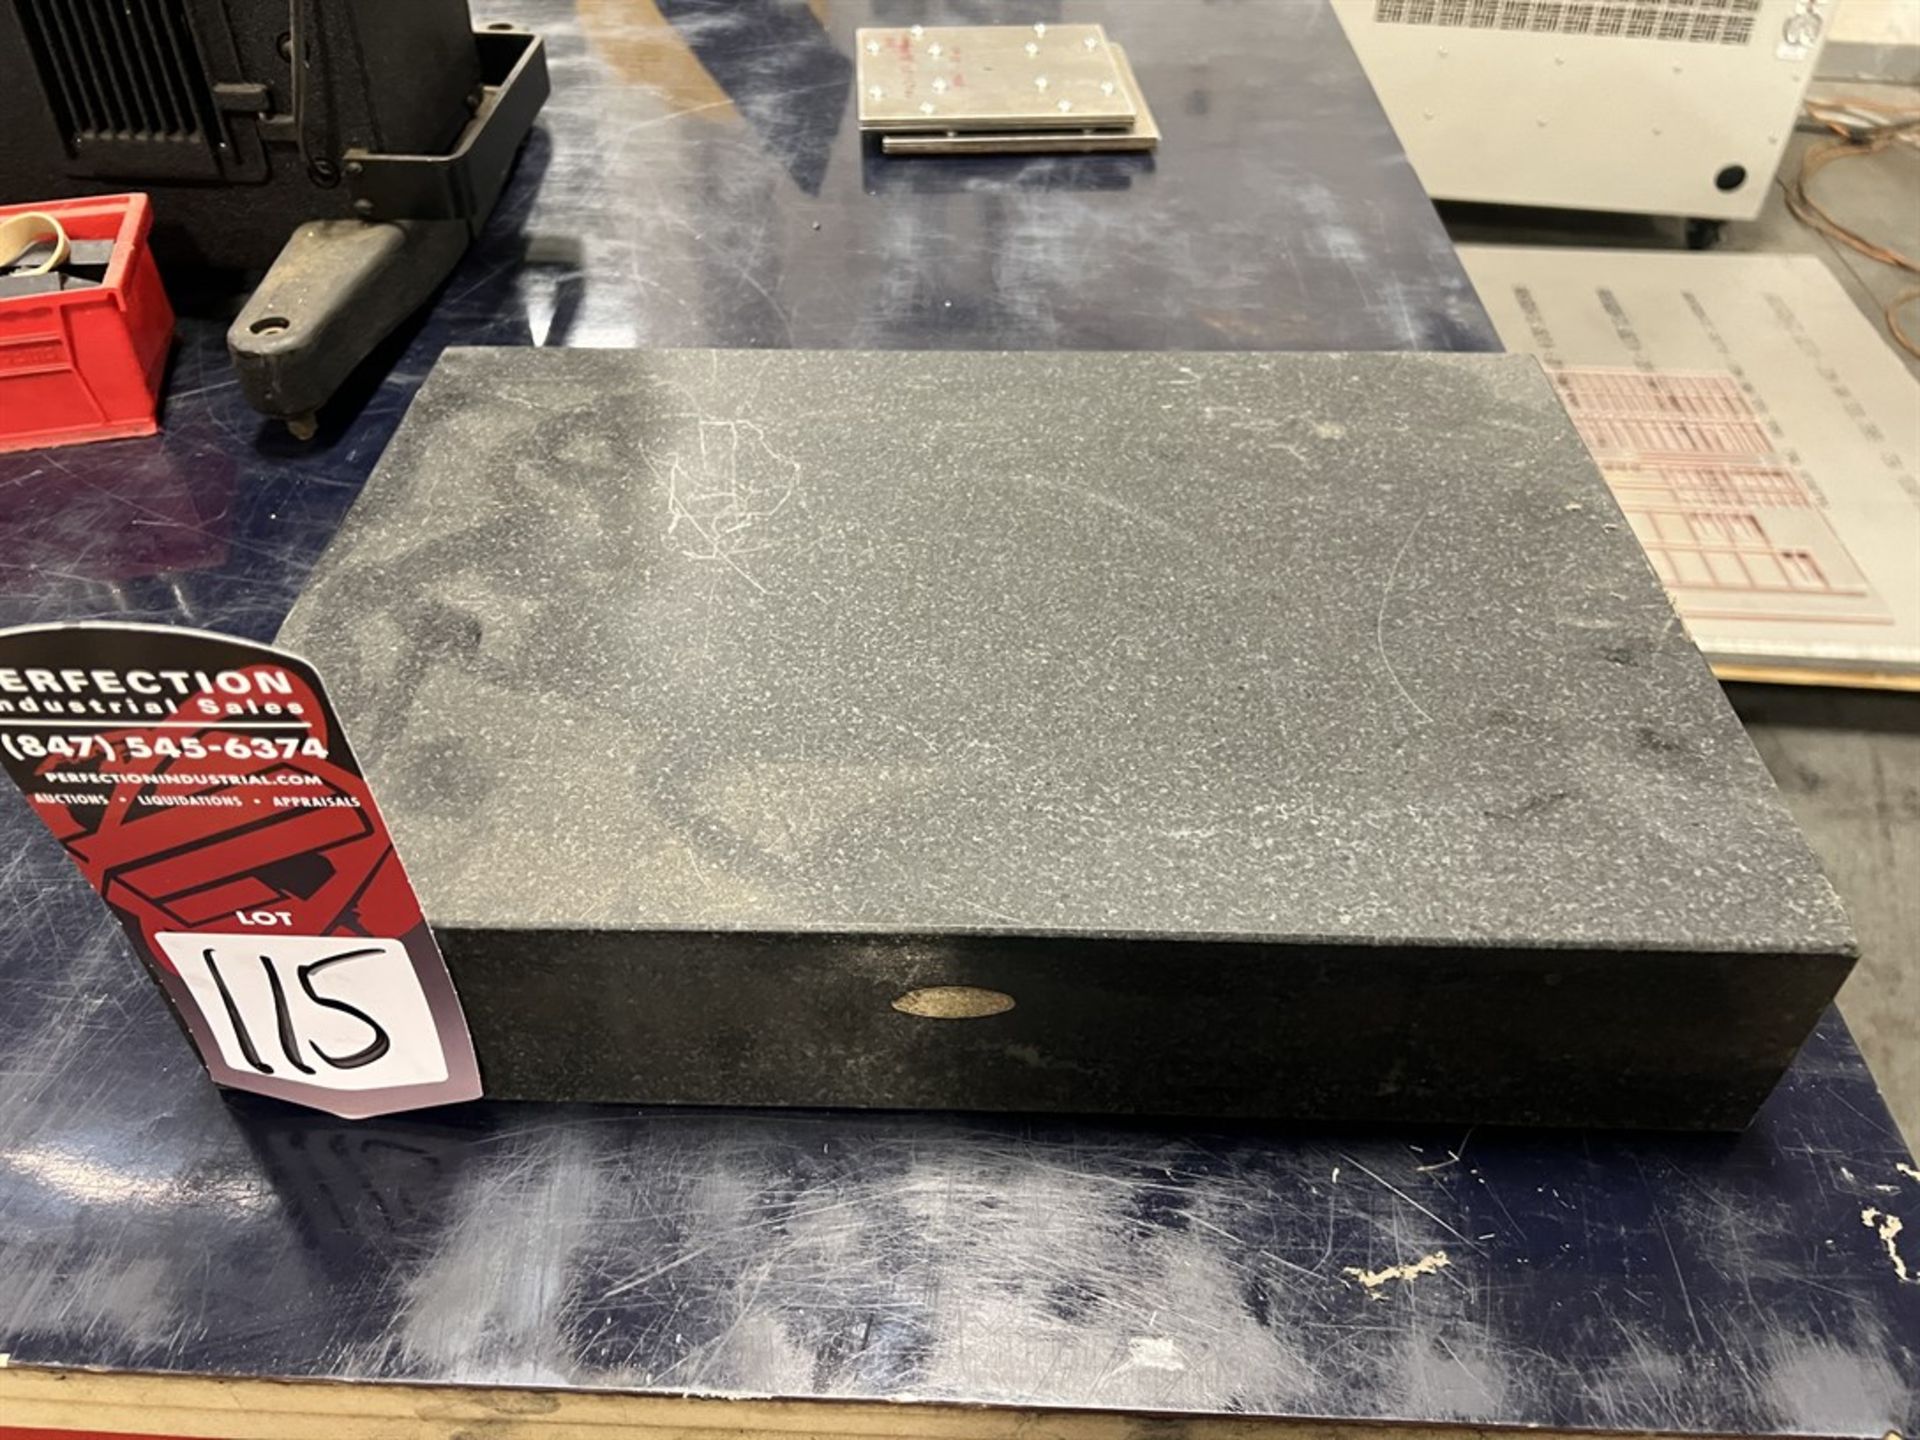 Black Granite Surface Plate, 12" x 18" x 4" - Image 2 of 2